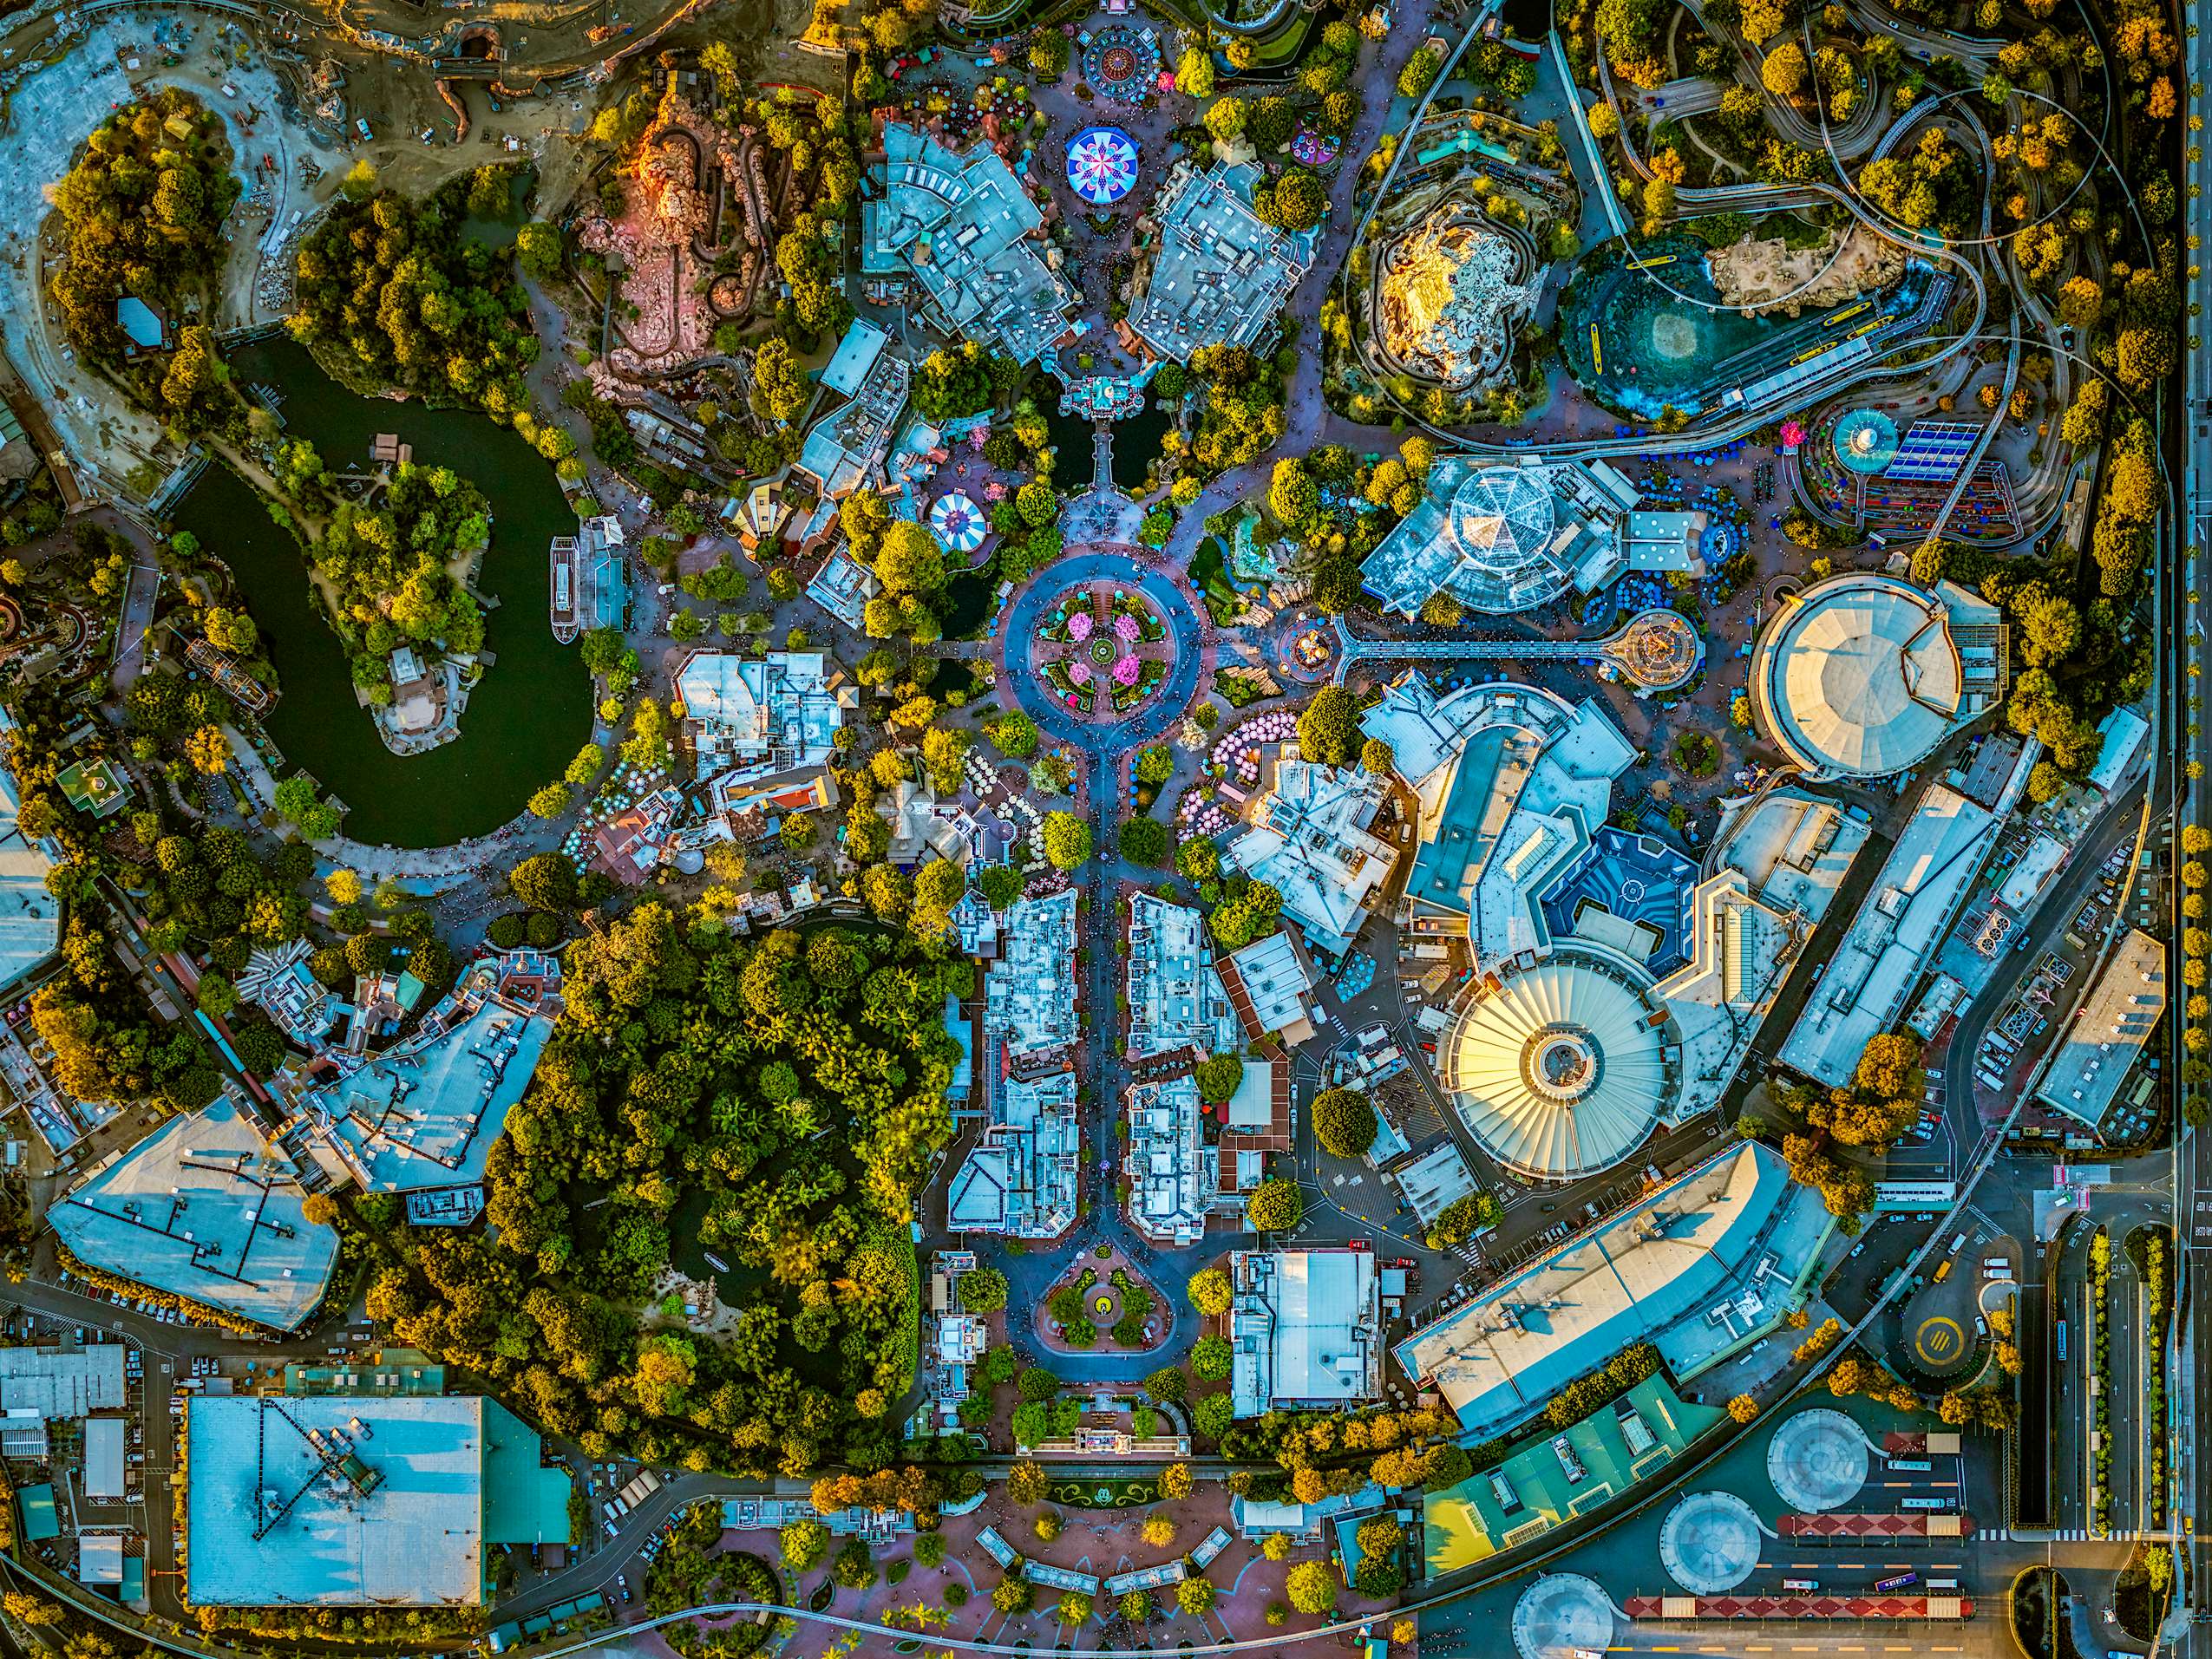 Photographer captures spectacular aerial images of US theme parks